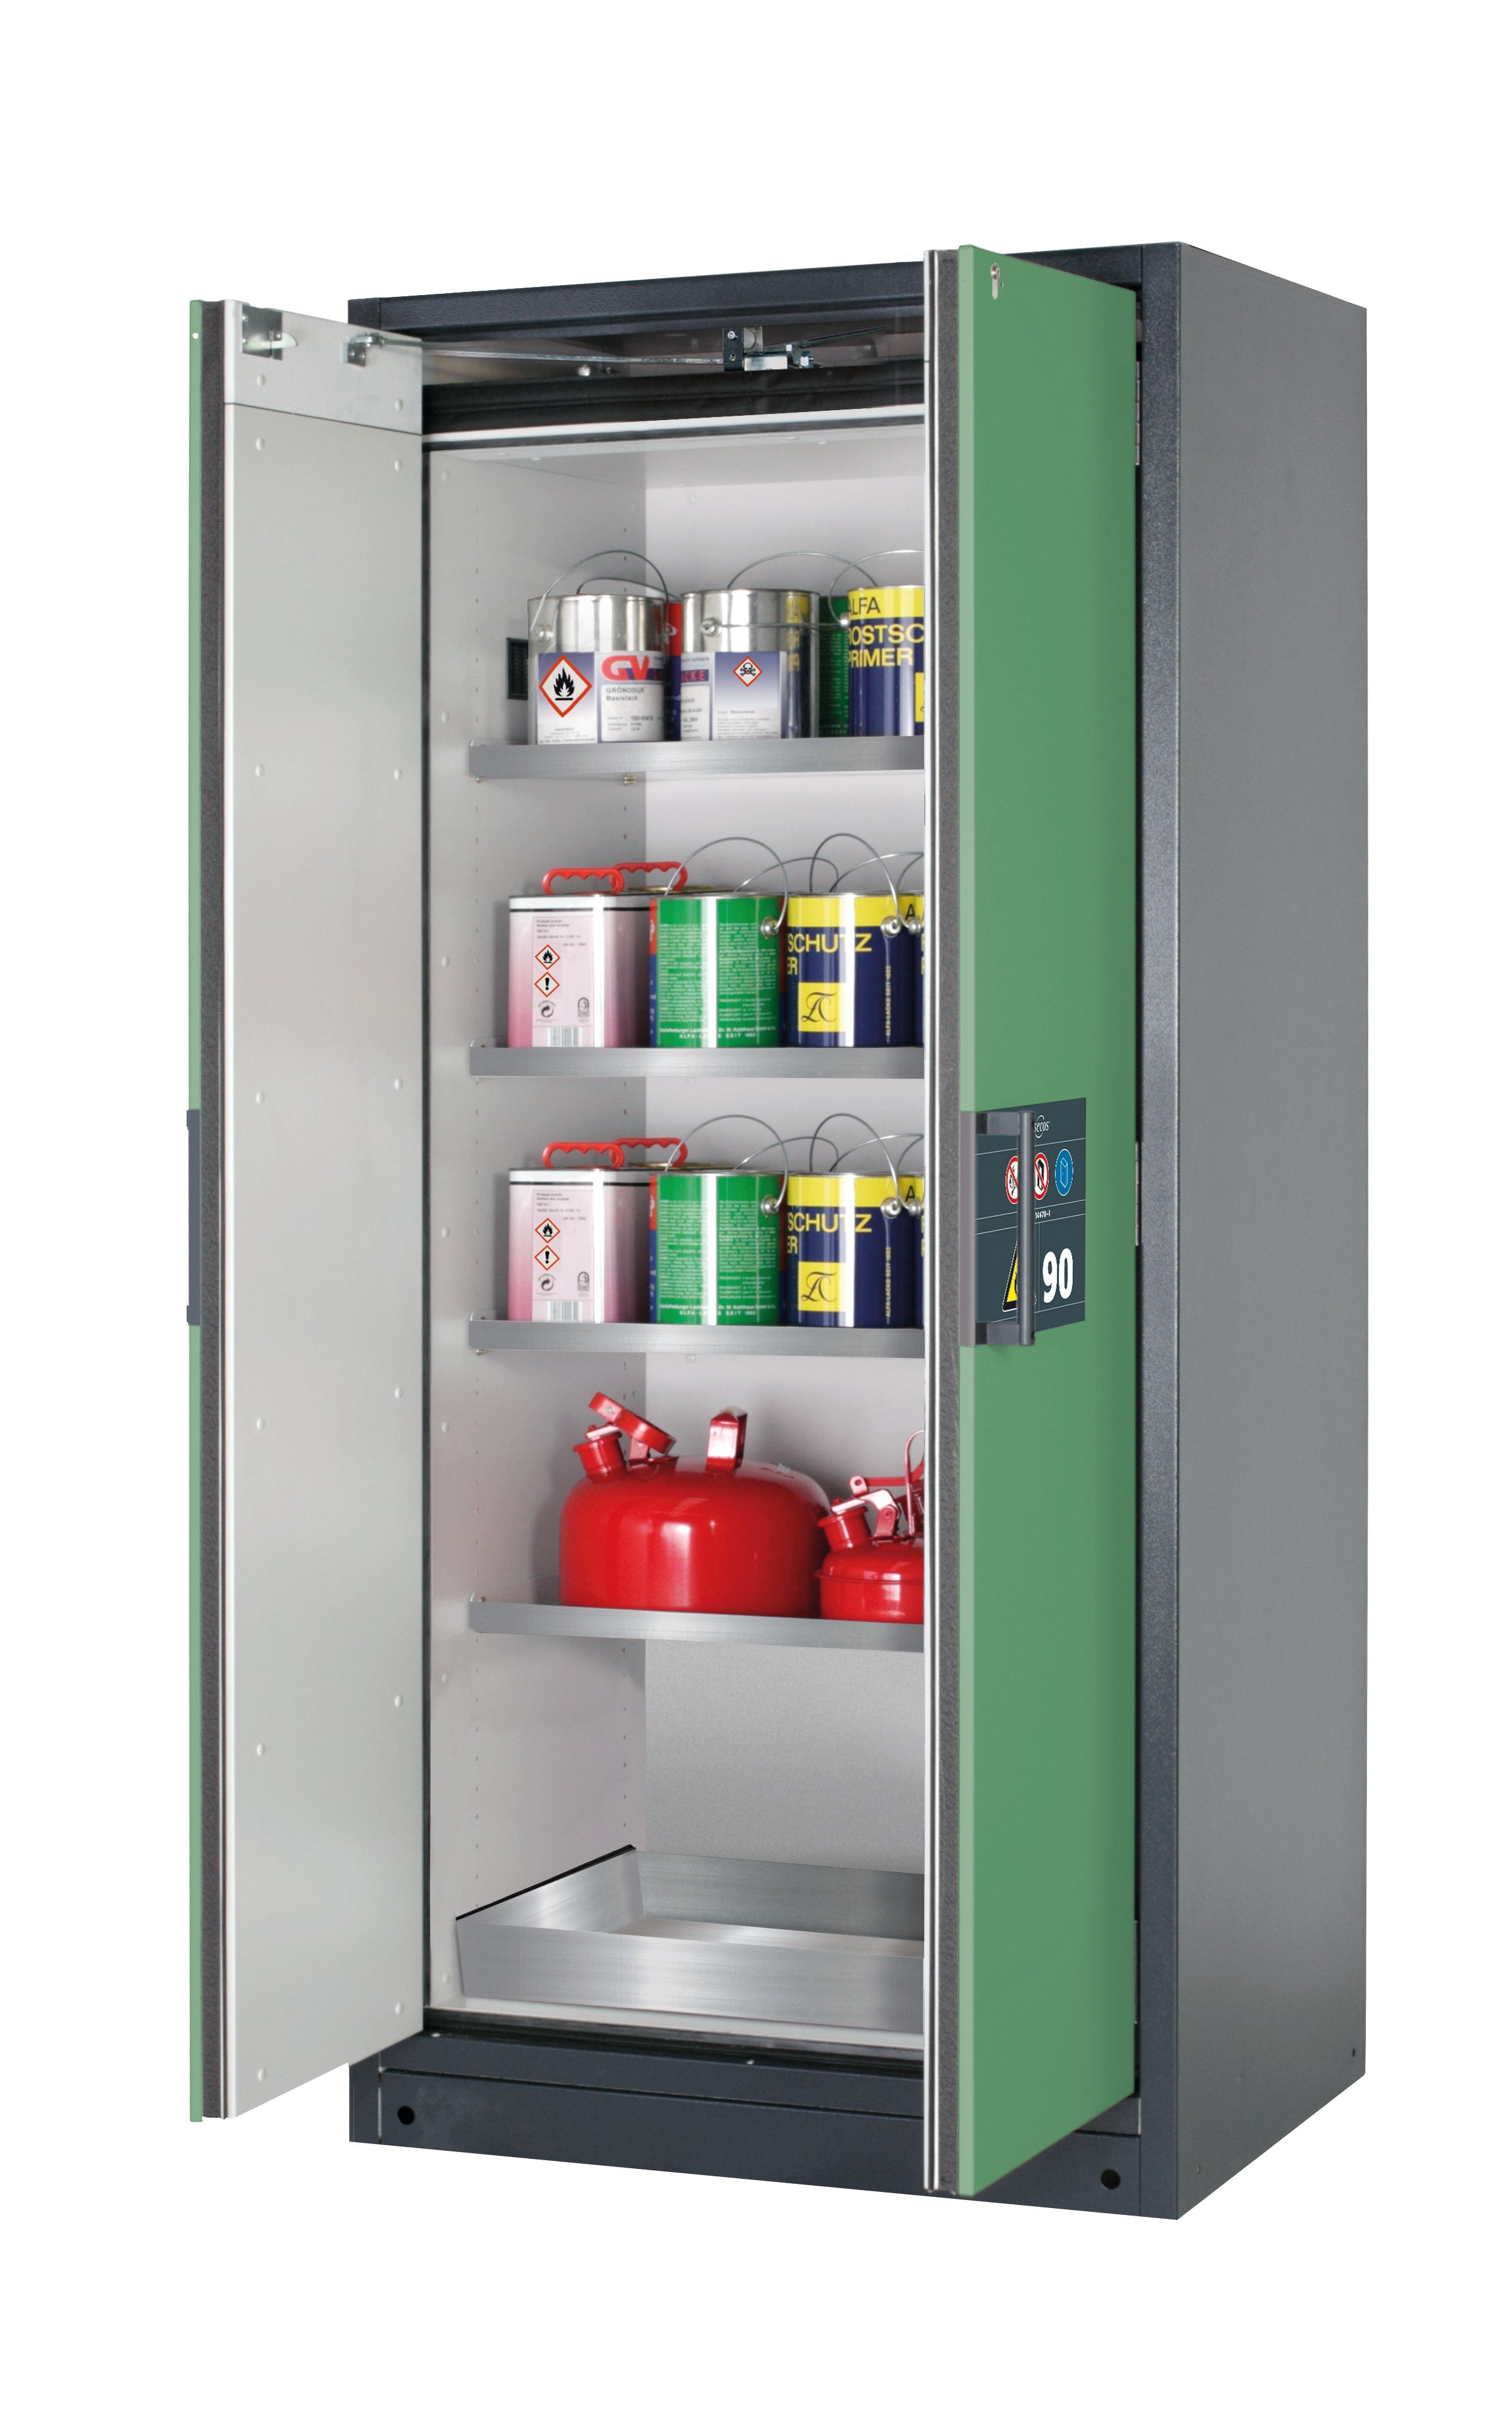 Type 90 safety storage cabinet Q-PEGASUS-90 model Q90.195.090.WDAC in reseda green RAL 6011 with 4x shelf standard (stainless steel 1.4301),